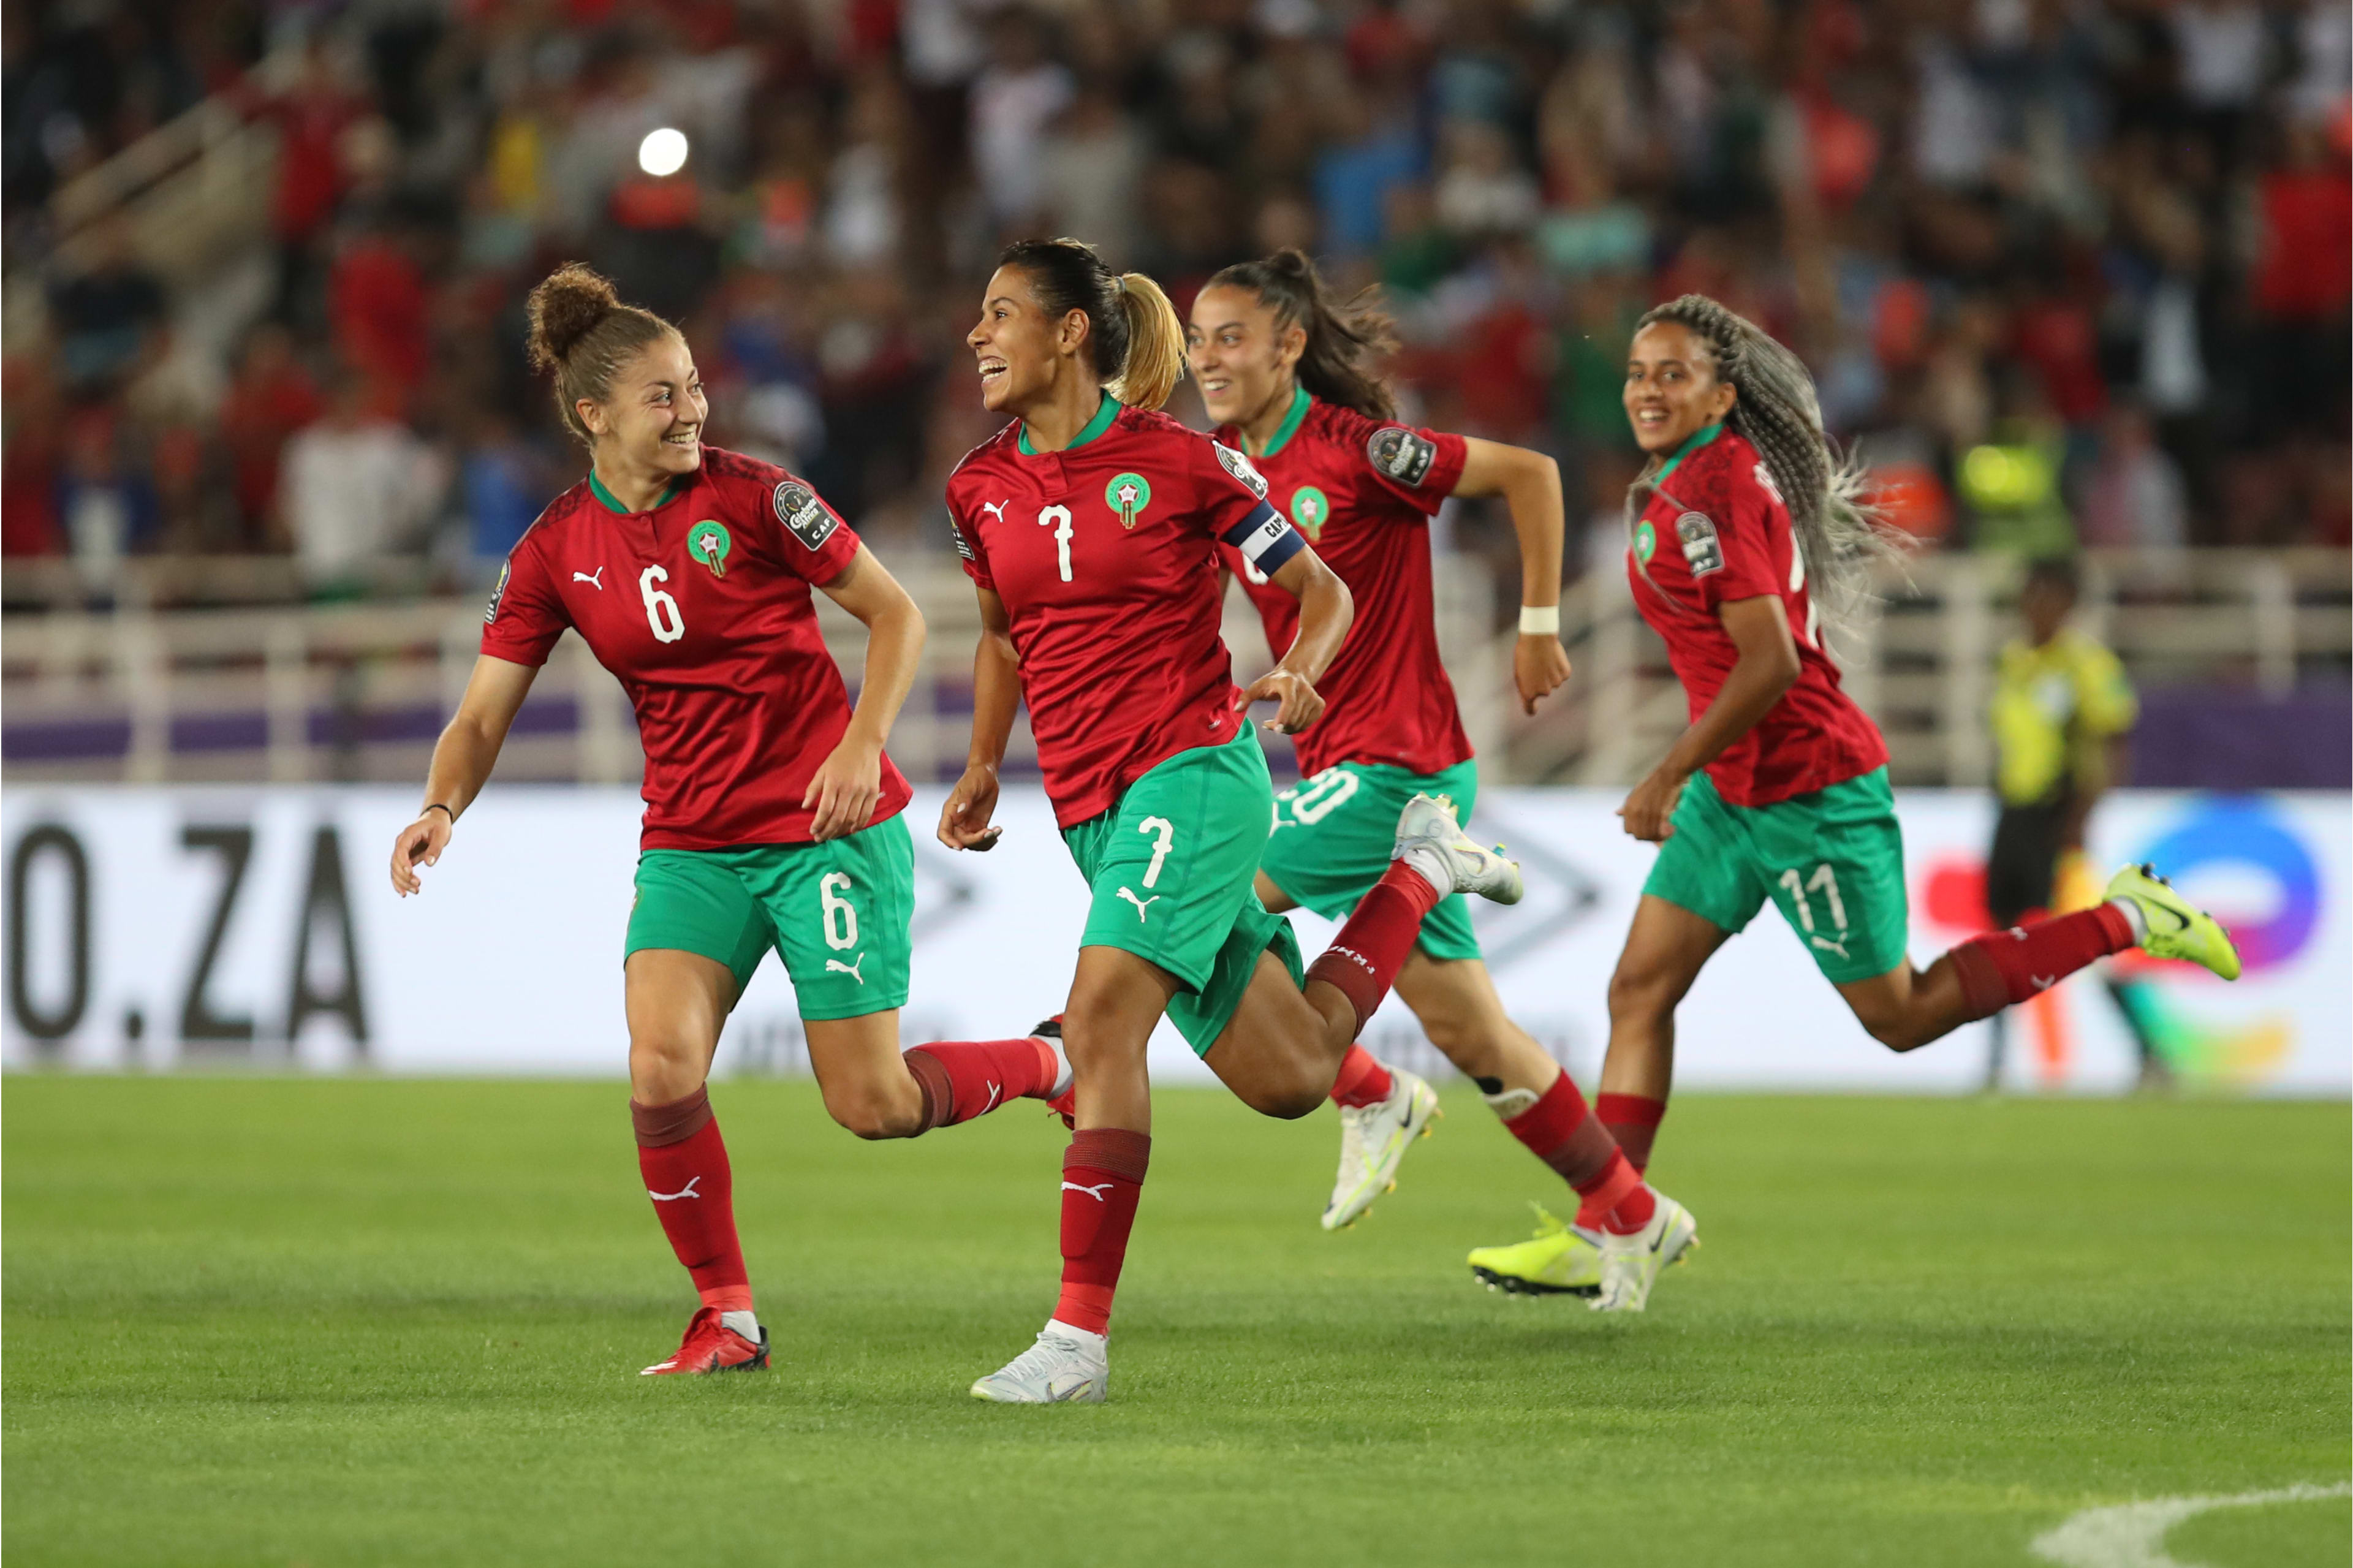 Ghizlane Chebbak of Morocco celebrates goal during the 2022 Women's Africa Cup of Nations match between Morocco and Burkina Faso held at the Prince Moulay Abdellah Stadium in Rabat, Morocco on 02 July 2022